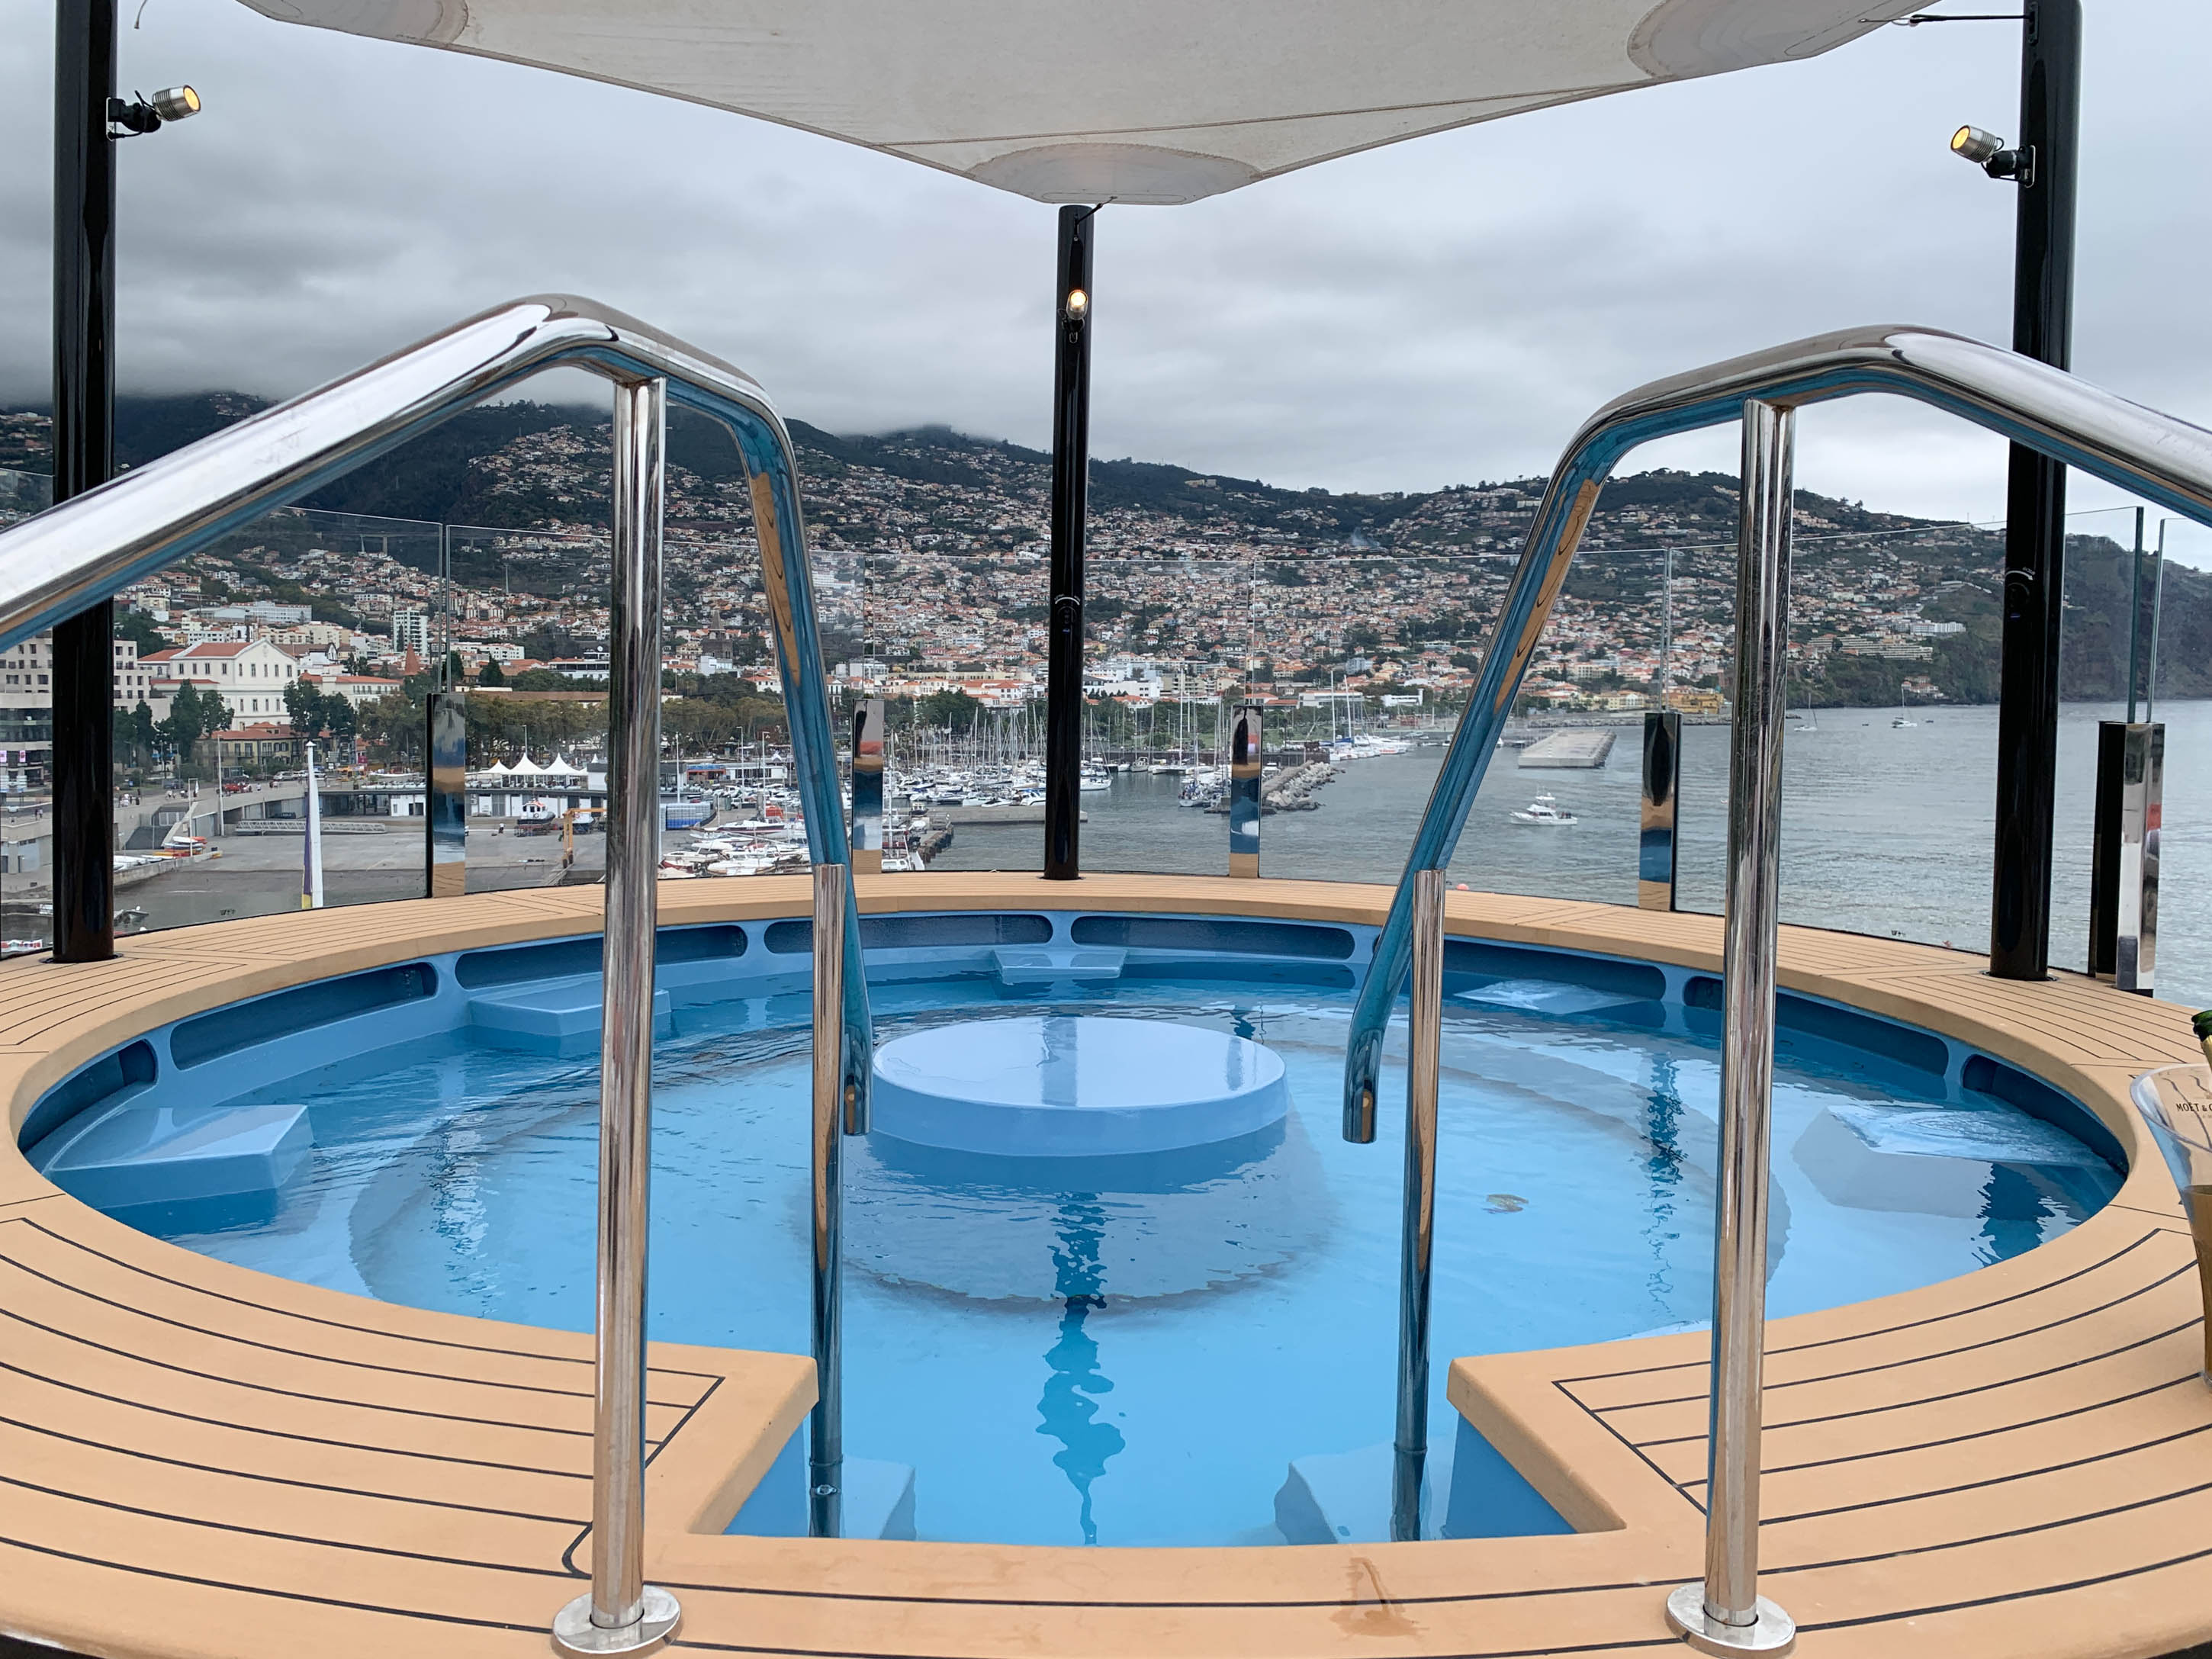 Ritz-Carlton Yacht Review: “Money Can Buy Happiness” Aboard Evrima